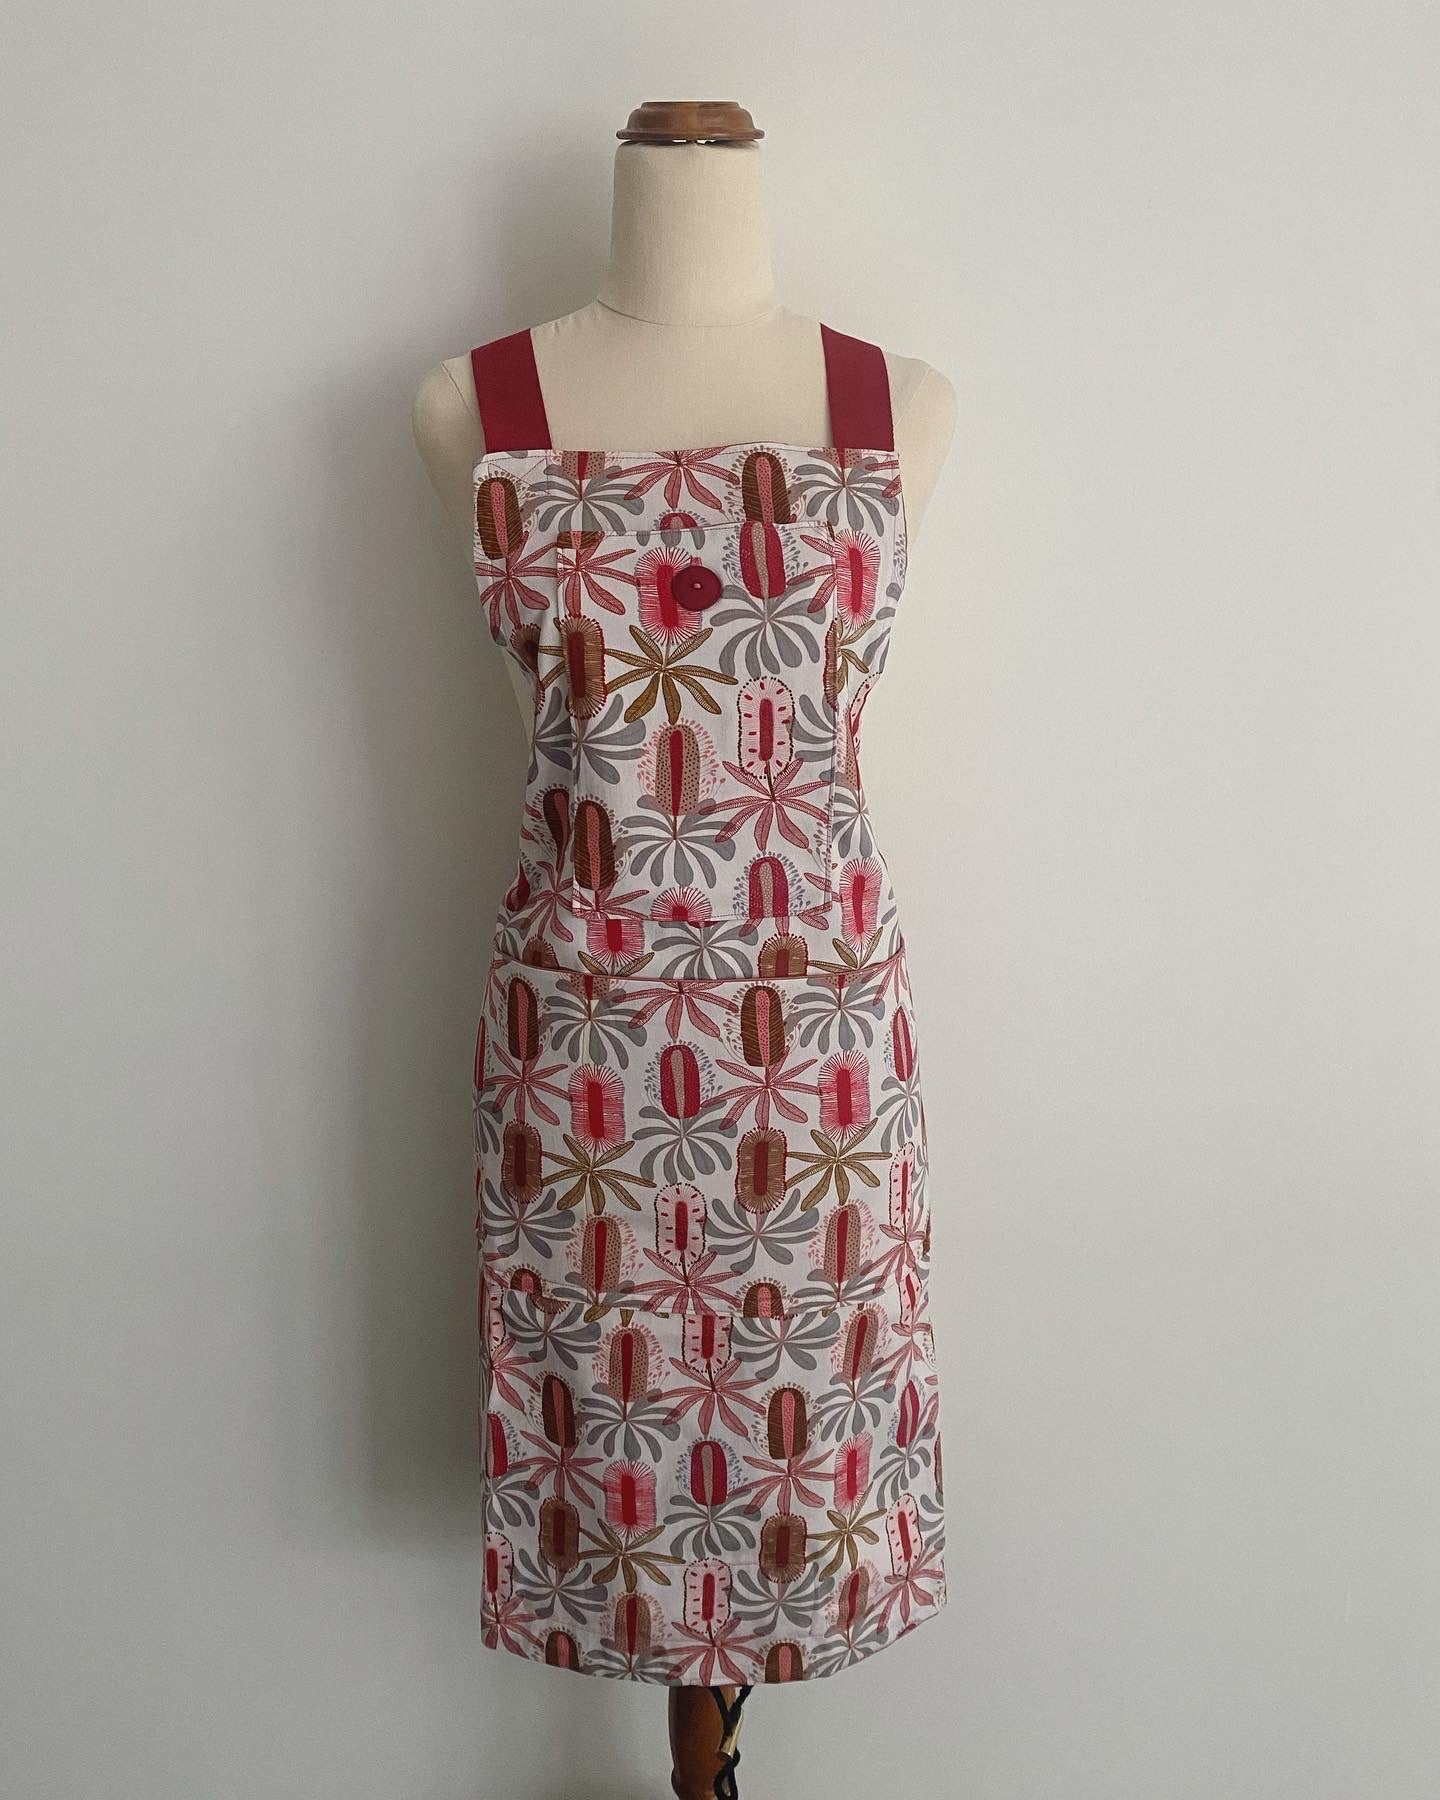 Harvest Apron Red Banksia, Garden Apron, Handmade, Durable High-Quality Lined Fabric, Drawstring Pouch